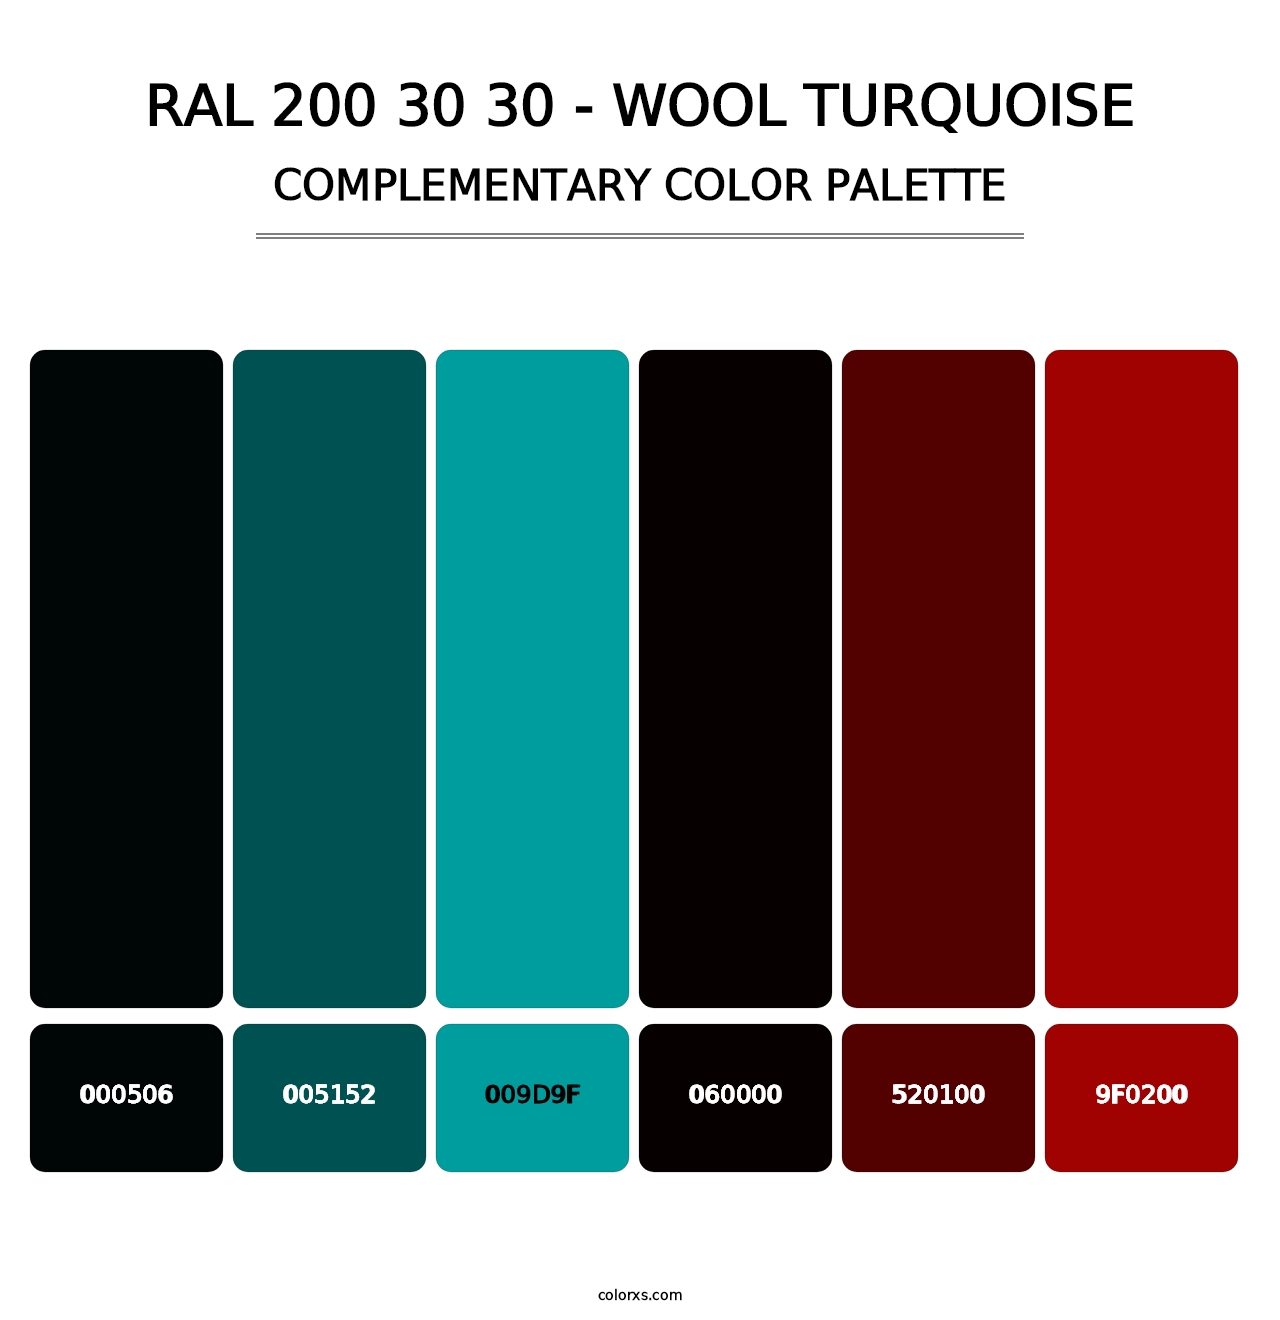 RAL 200 30 30 - Wool Turquoise - Complementary Color Palette